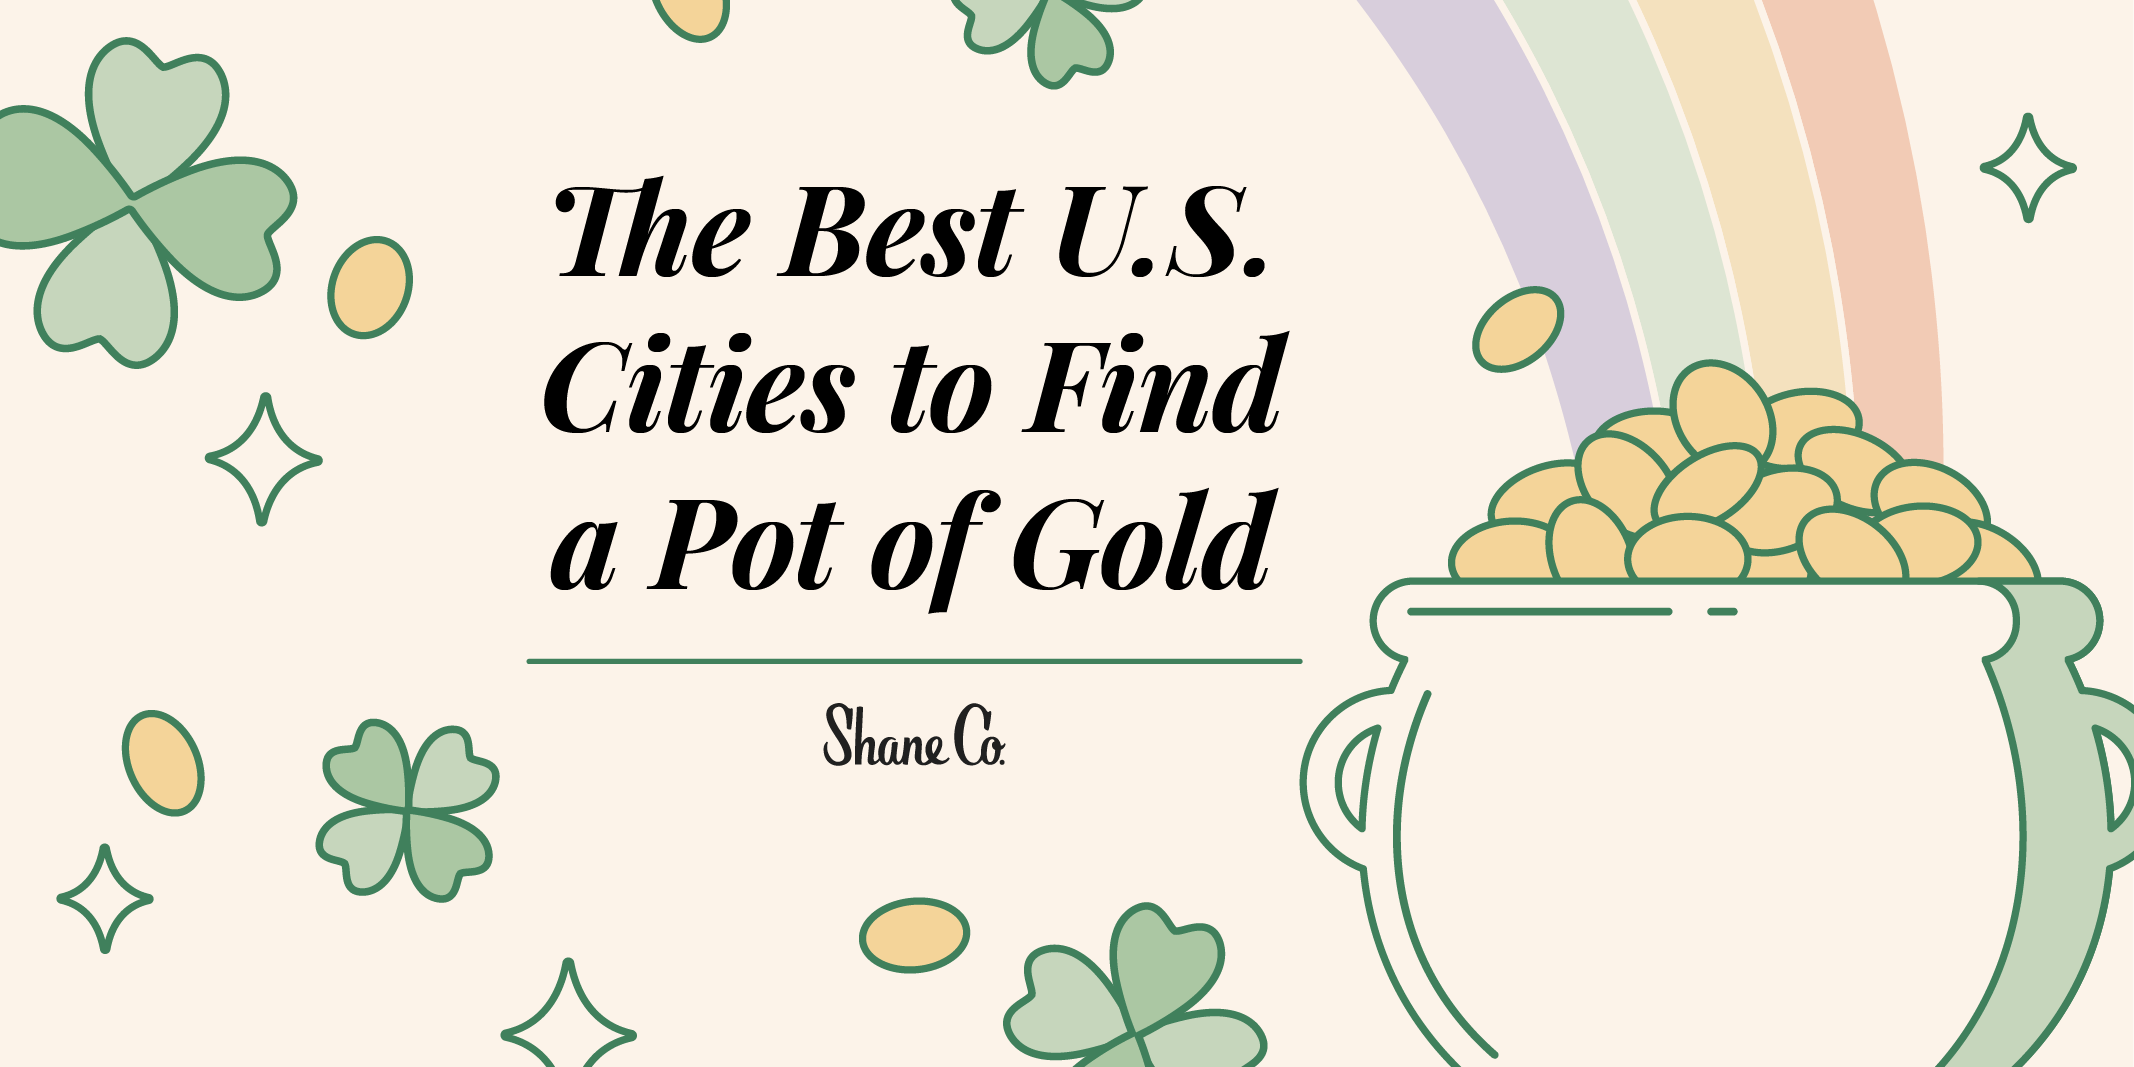 A header image for a blog about cities where you could find a pot of gold